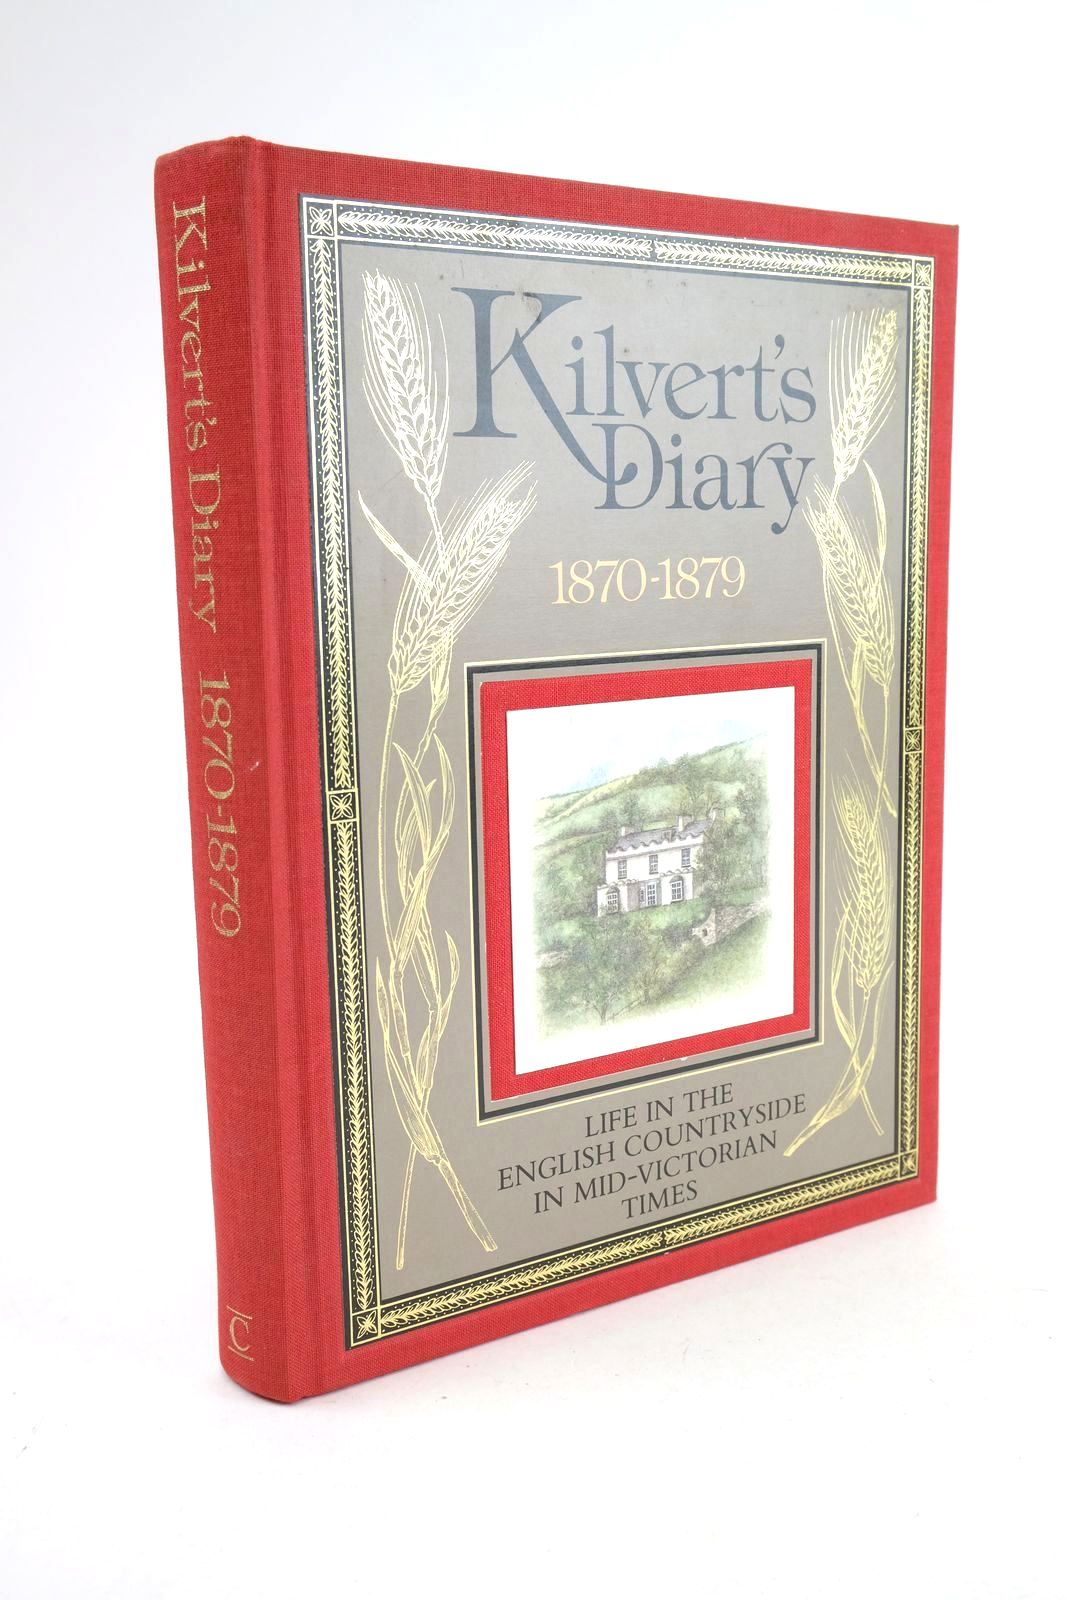 Photo of KILVERT'S DIARY 1870-1879 written by Kilvert, Francis Plomer, William published by Century Hutchinson Ltd. (STOCK CODE: 1325314)  for sale by Stella & Rose's Books